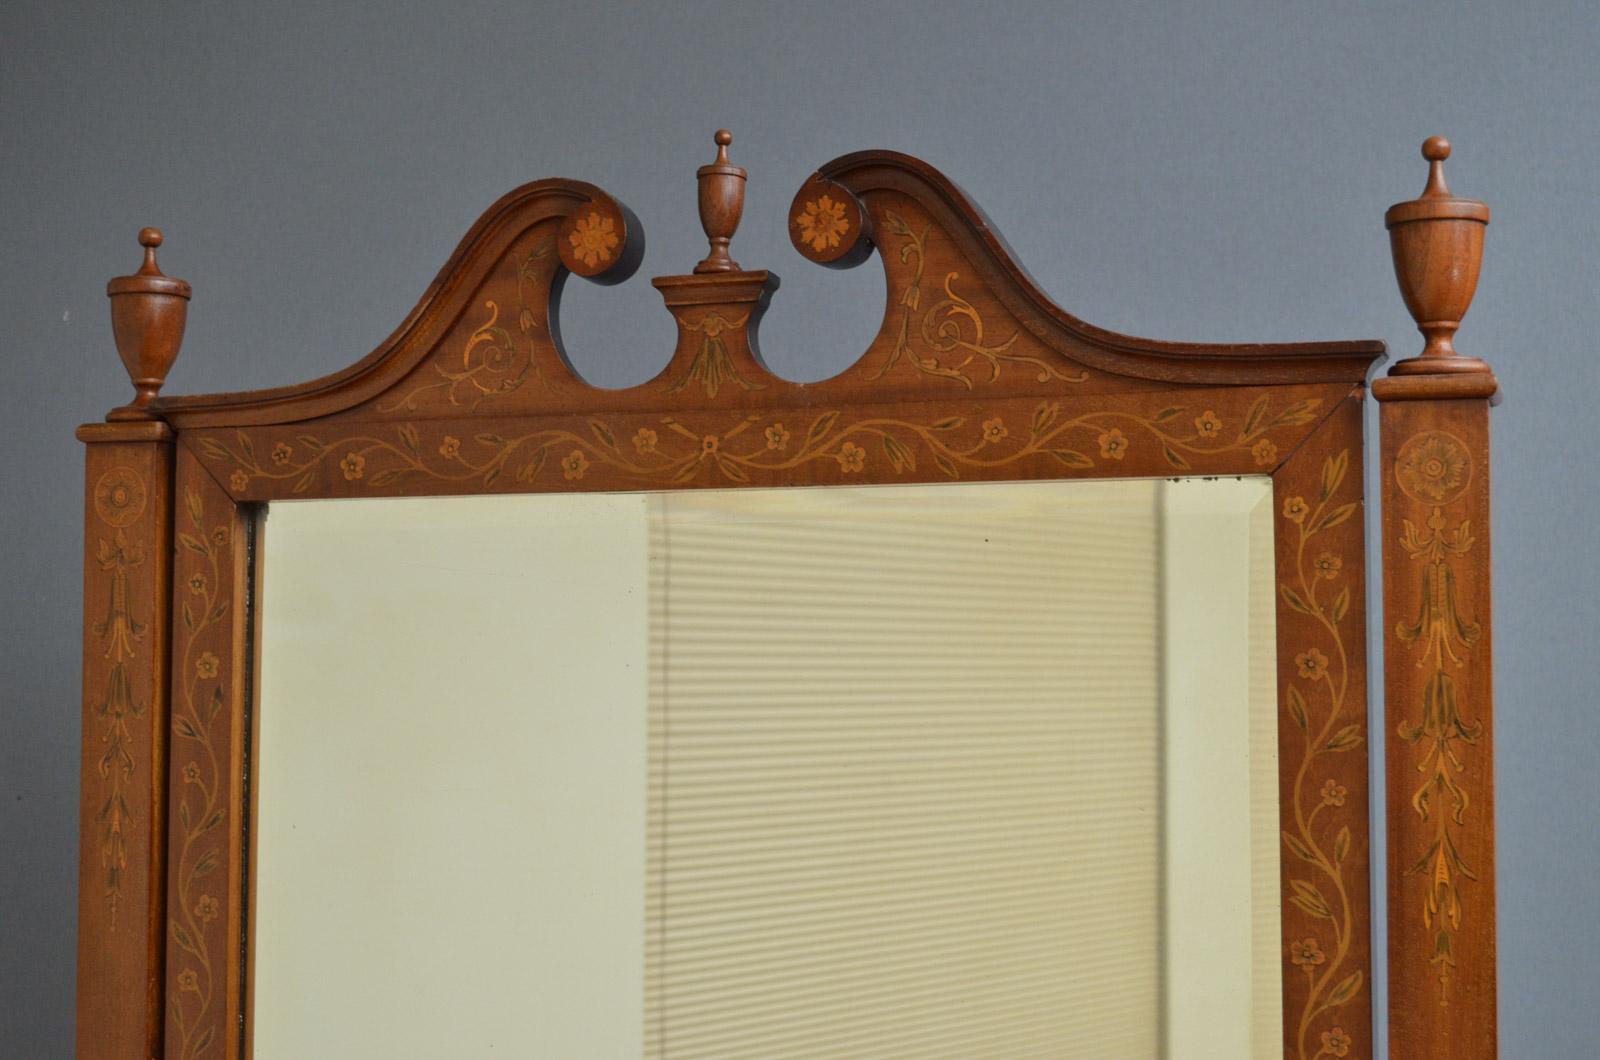 Sn3616, exceptional Edwardian, mahogany and inlaid cheval mirror, having inlaid pediment with finials above original mirror plate in finely inlaid frame and uprights, standing on downswept legs terminating in original brass castors. This fantastic